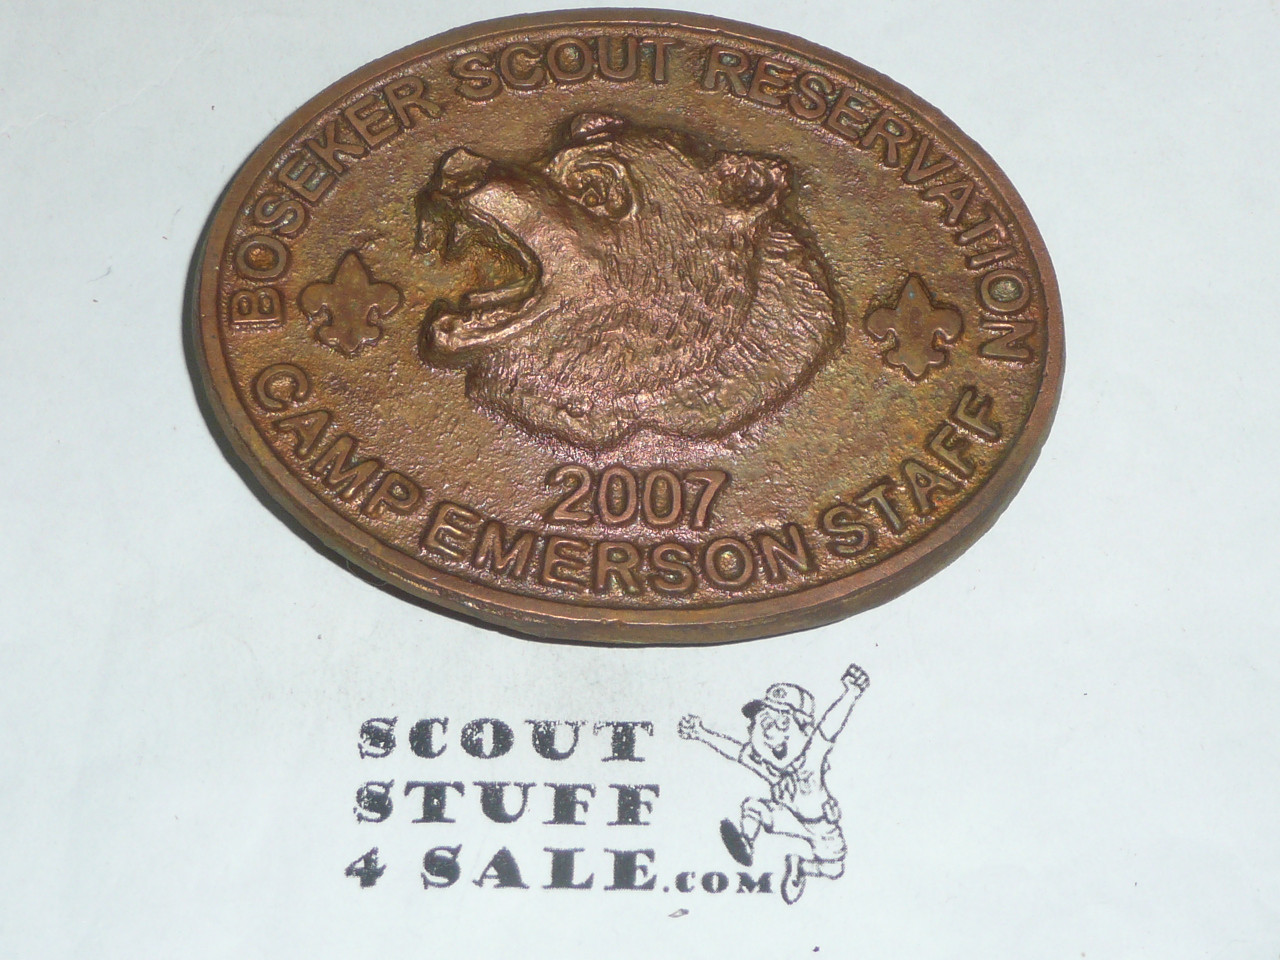 Camp Emerson 2007 Staff Boy Scout Belt Buckle, Boseker Scout Reservation